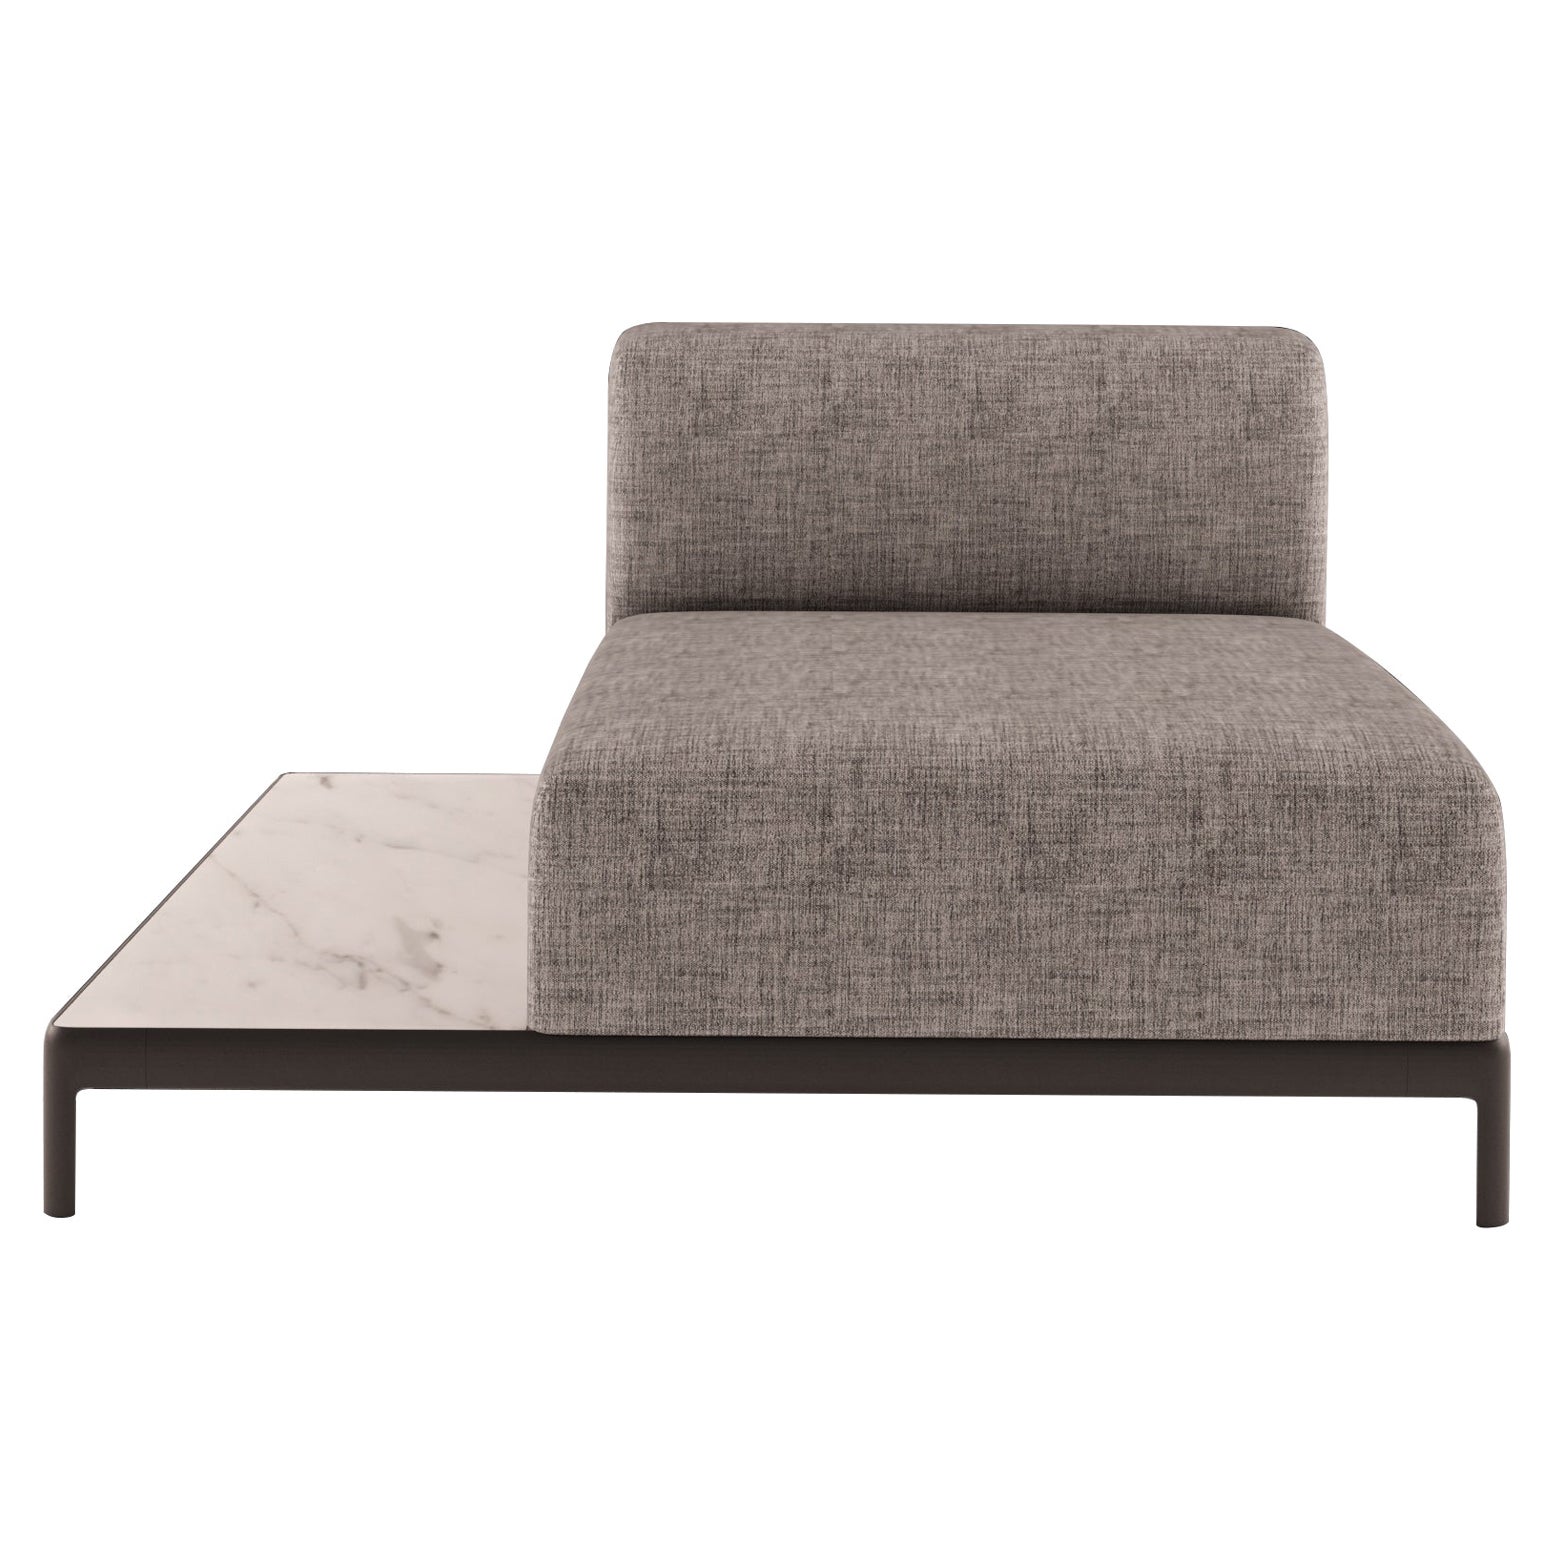 Alias P46 AluZen Soft Top Sofa with Upholstery and Lacquered Aluminum Frame For Sale